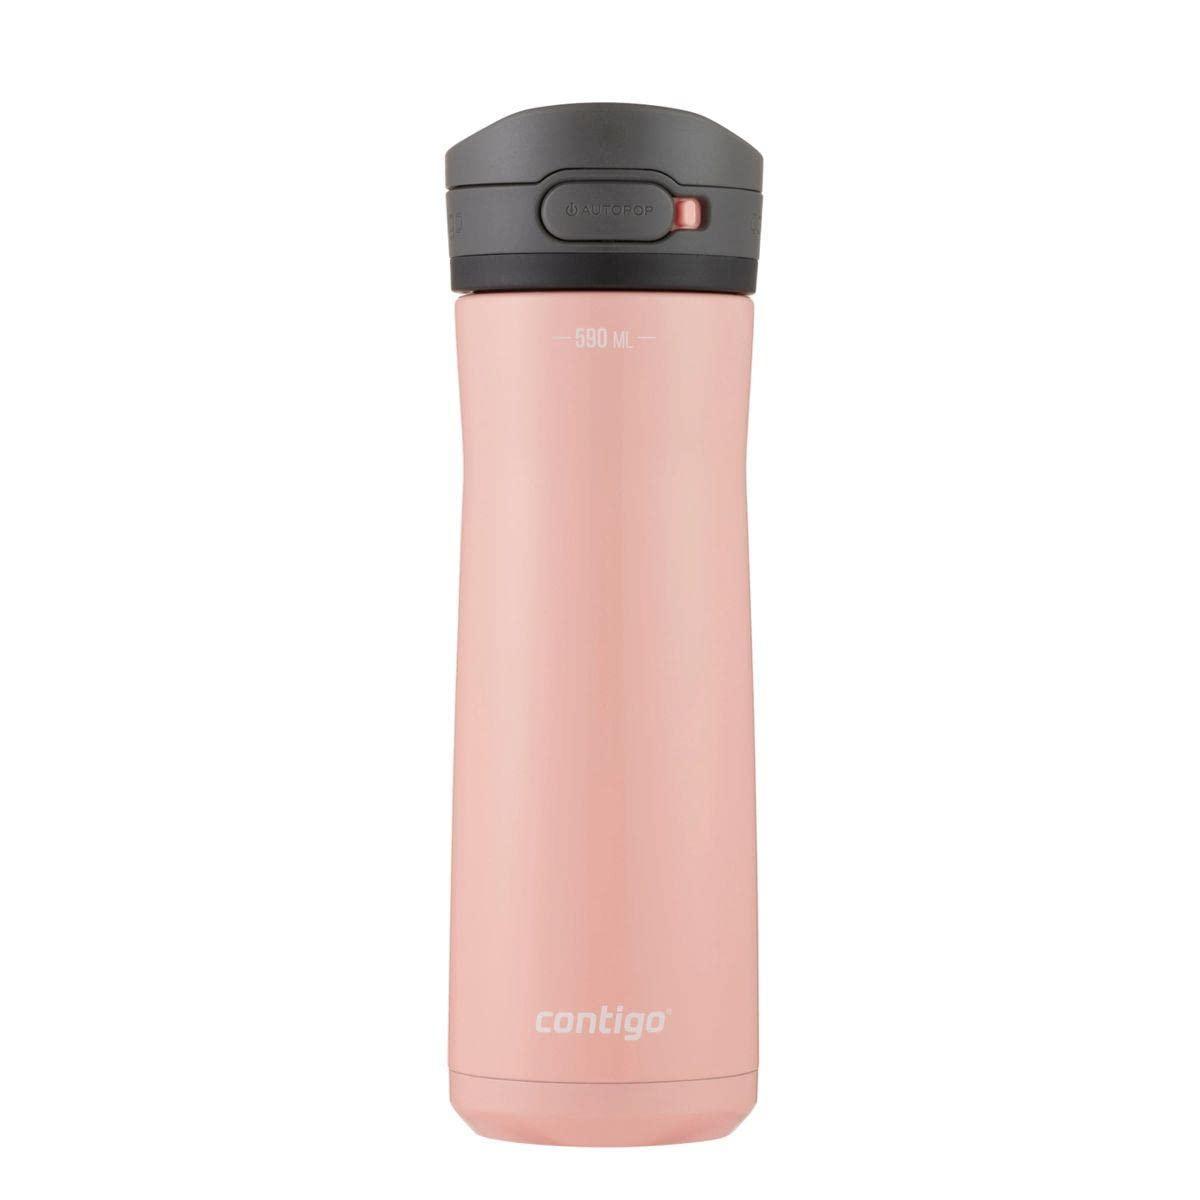 contigo jackson chill drinks bottle, large bpa-free stainless steel water bottle, 100% leakproof, keeps drinks cool for up to